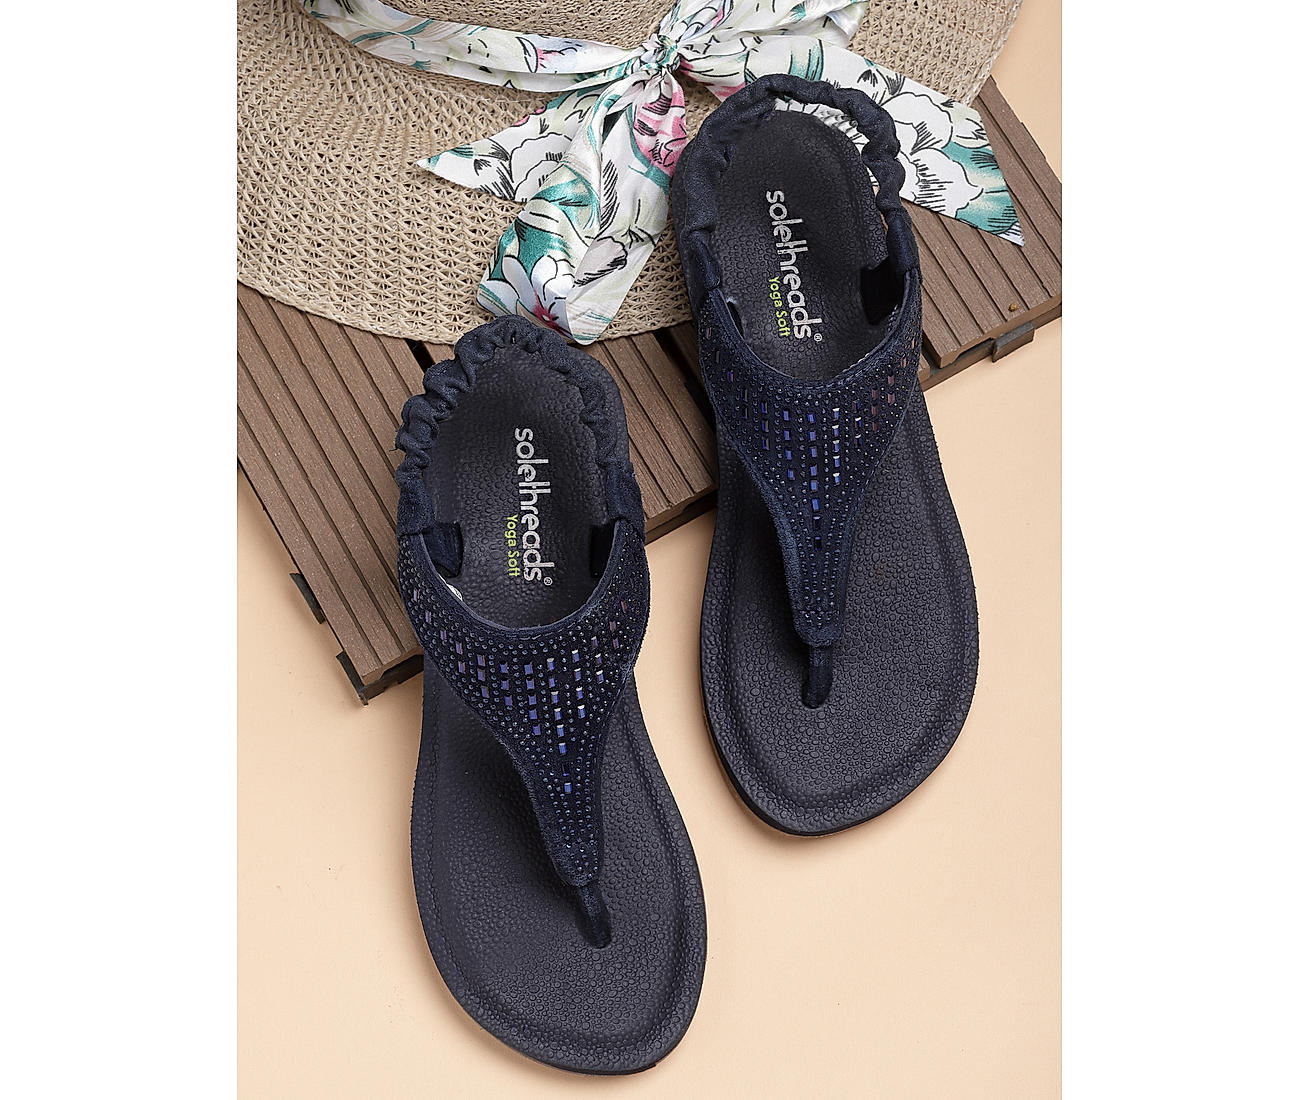 Buy Sole Threads Women's Navy Yoga Sandals Online at Regal Shoes